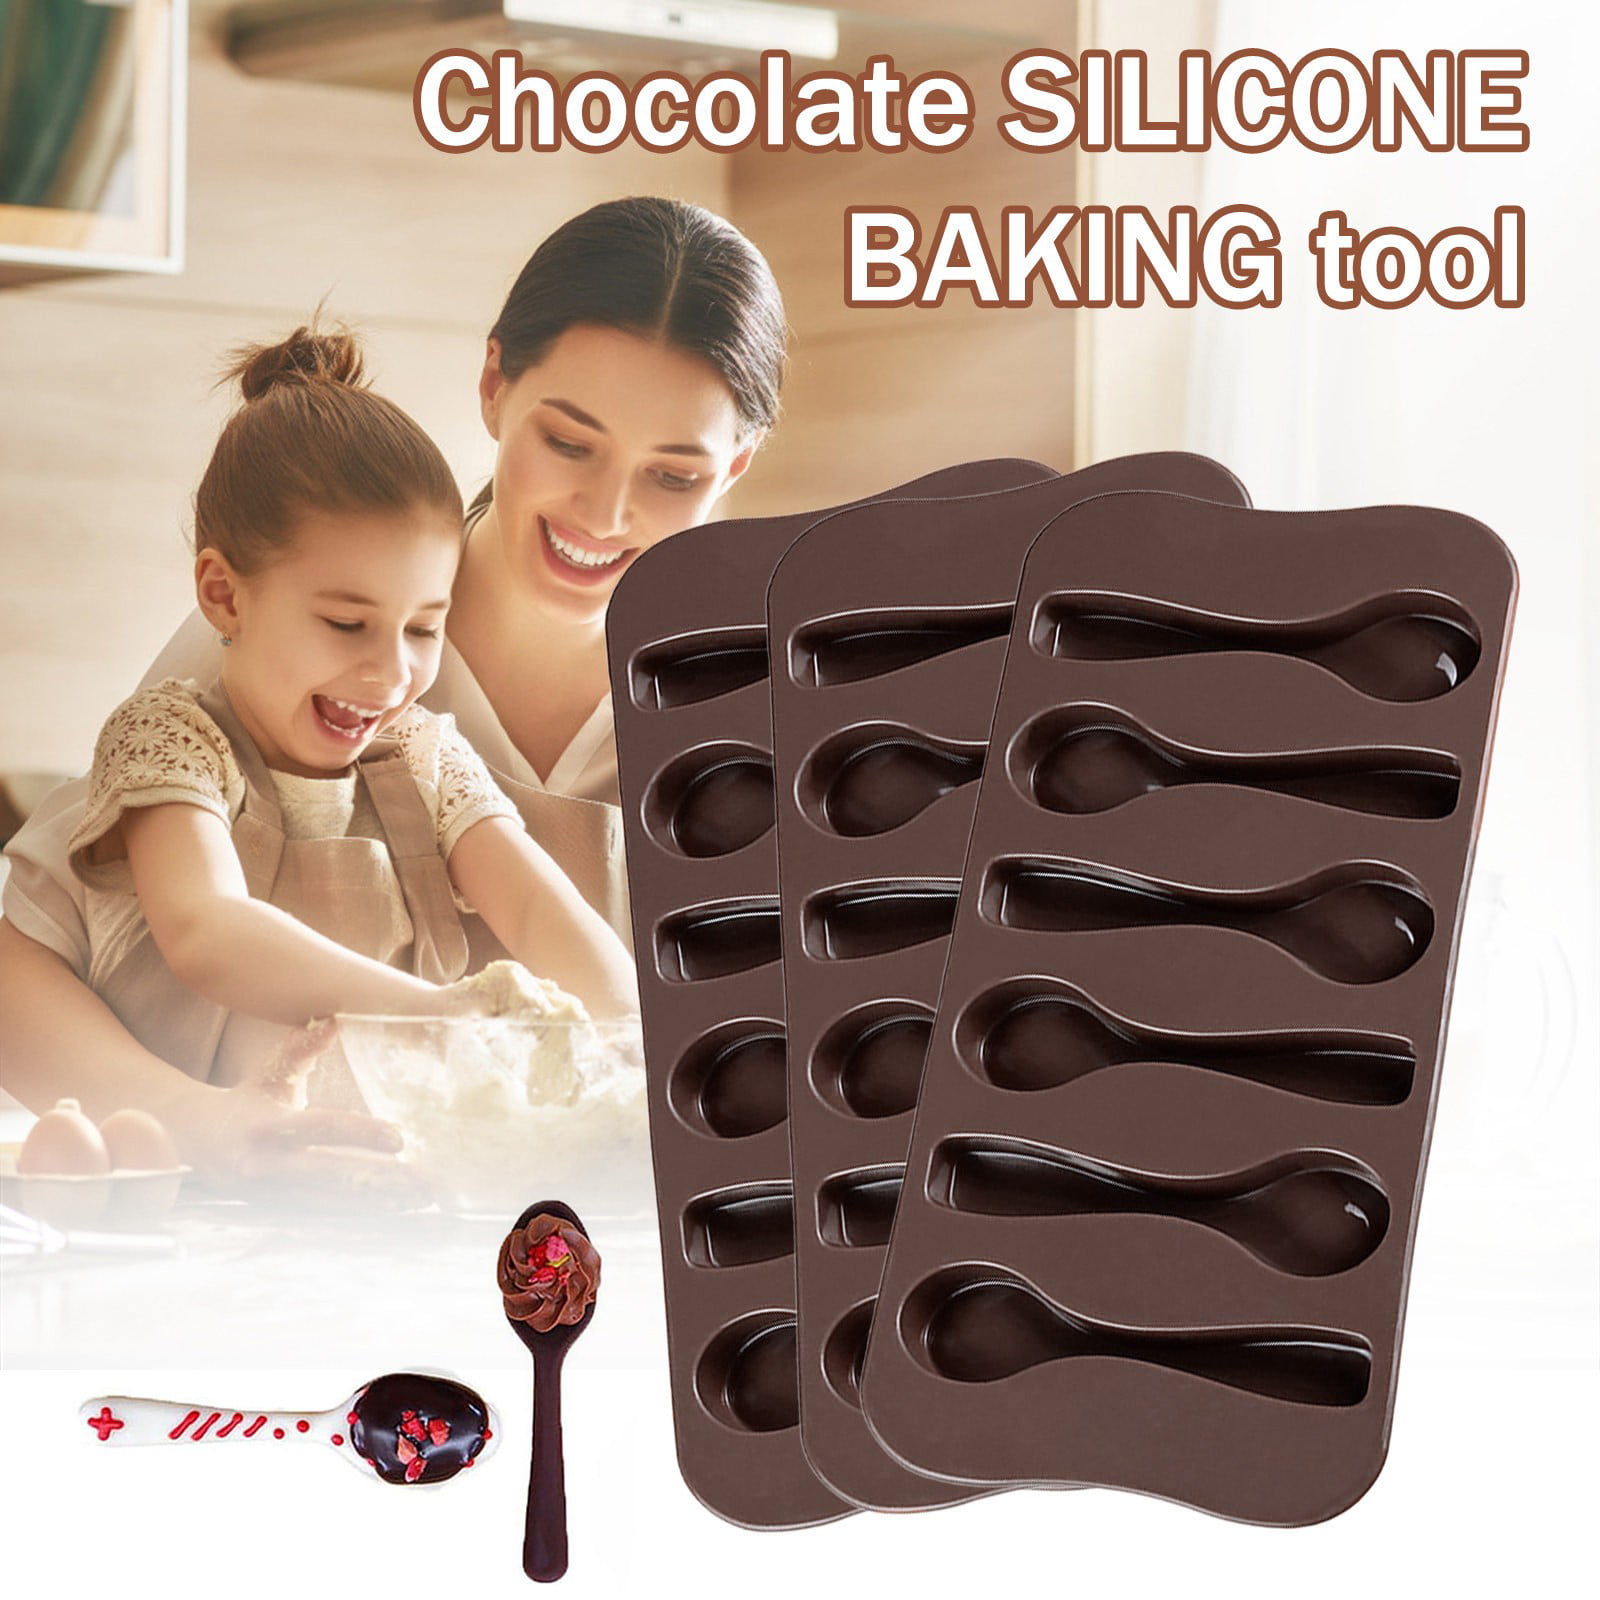 6 Spoons Shape Silicone Chocolate Jelly Candy Mold Cake Fondant Sugar Crafts 